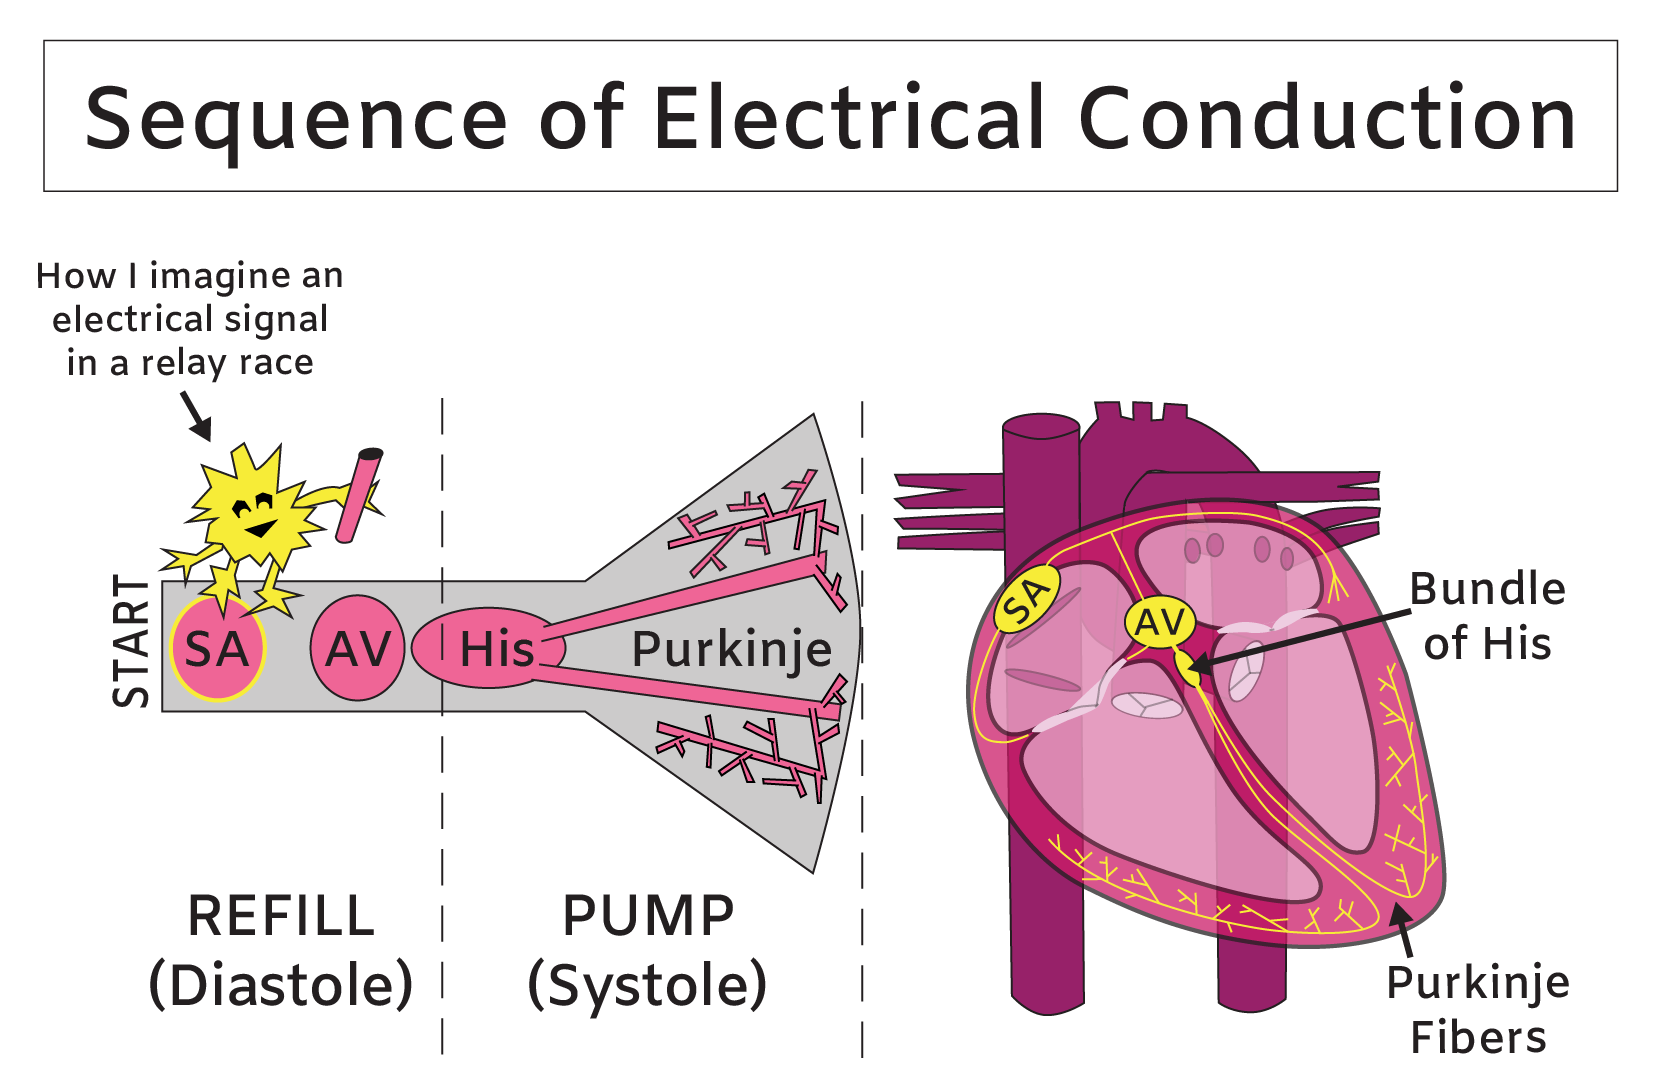 sequence of electrical conduction through the heart